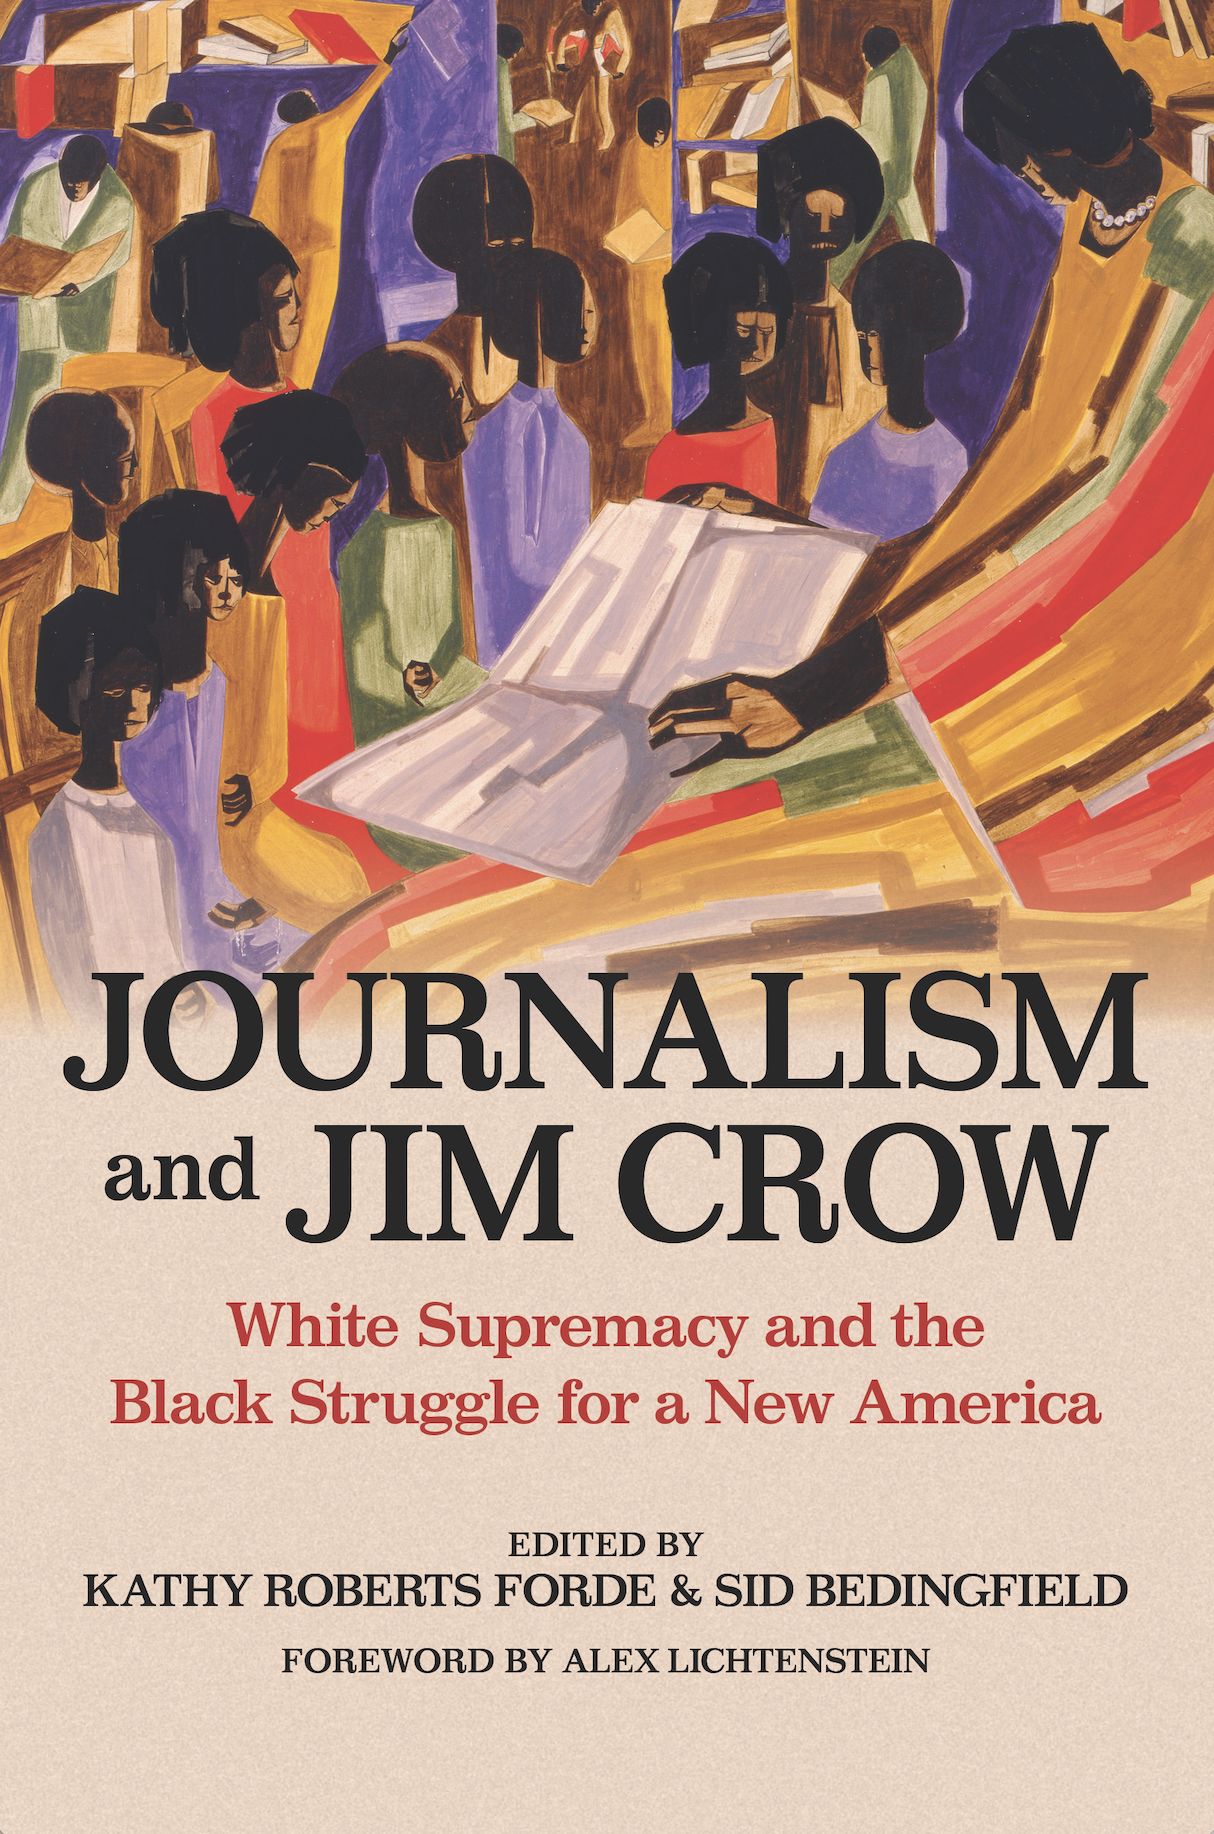 "Journalism and Jim Crow: White Supremacy and the Black Struggle for a New America"